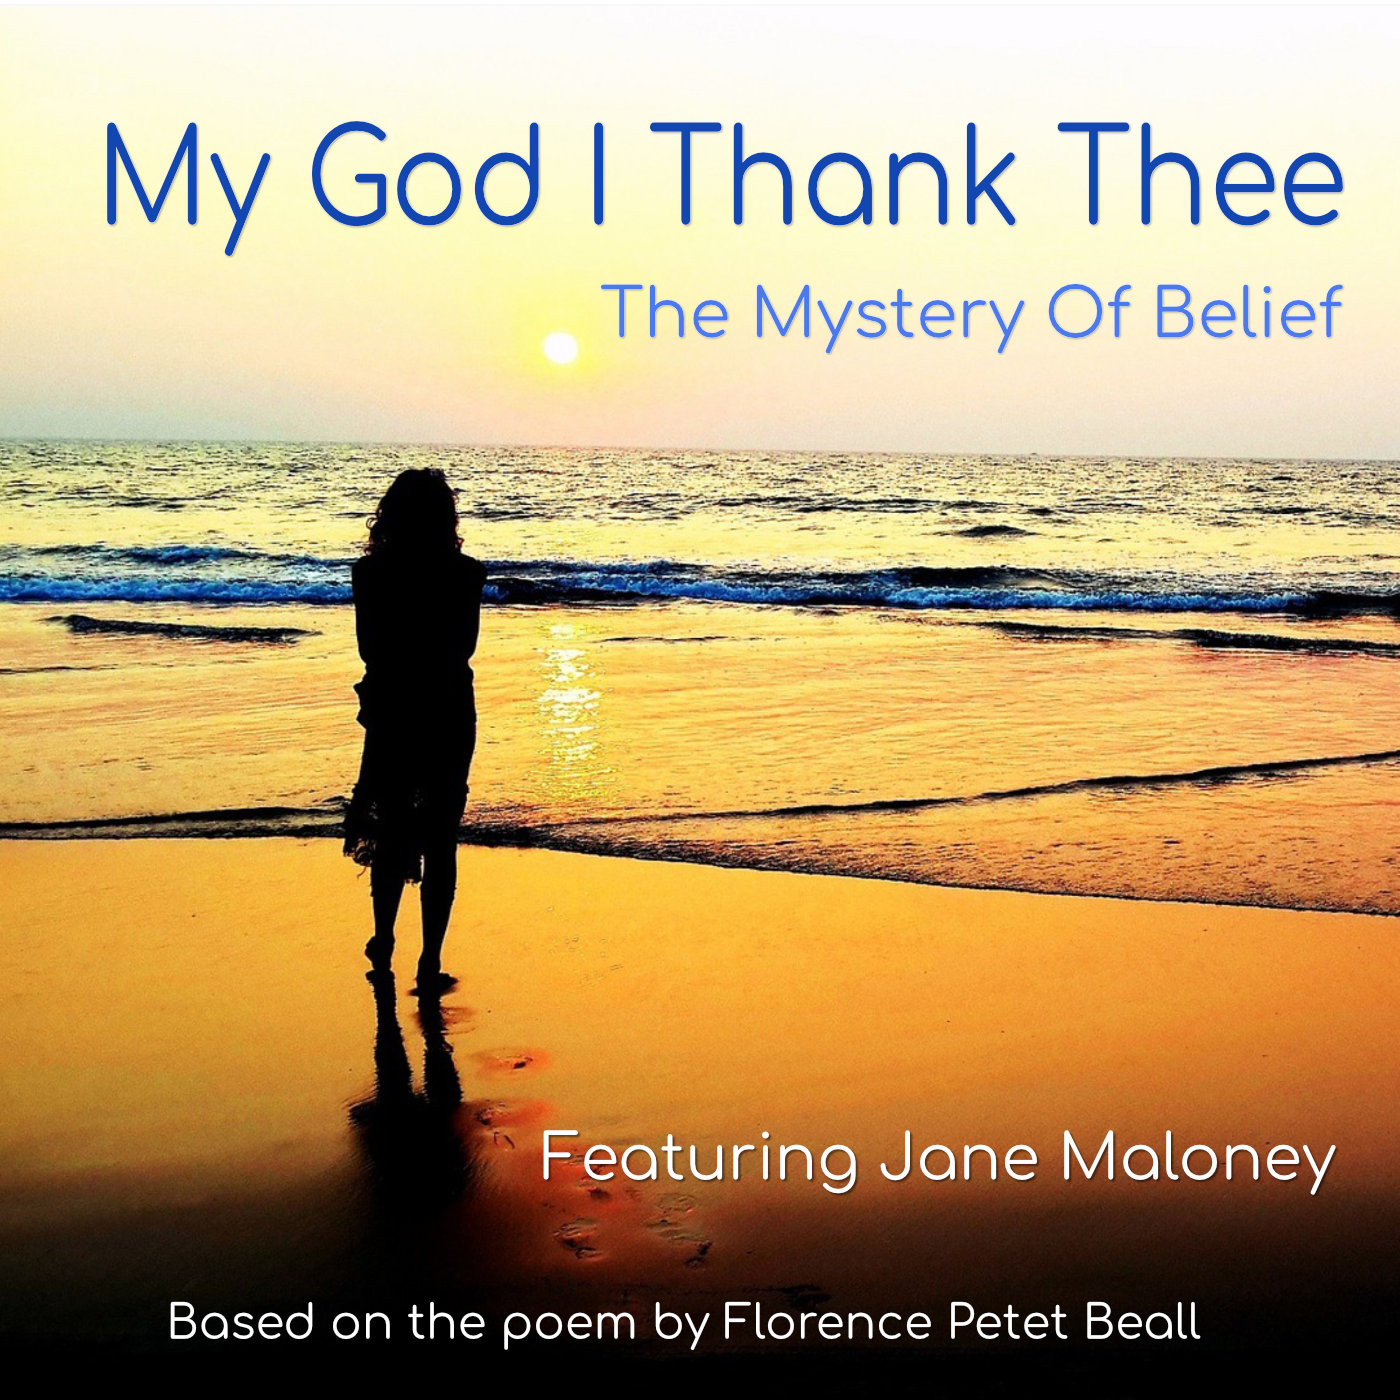 My God I Thank Thee - CD Cover - Featuring Jane Maloney